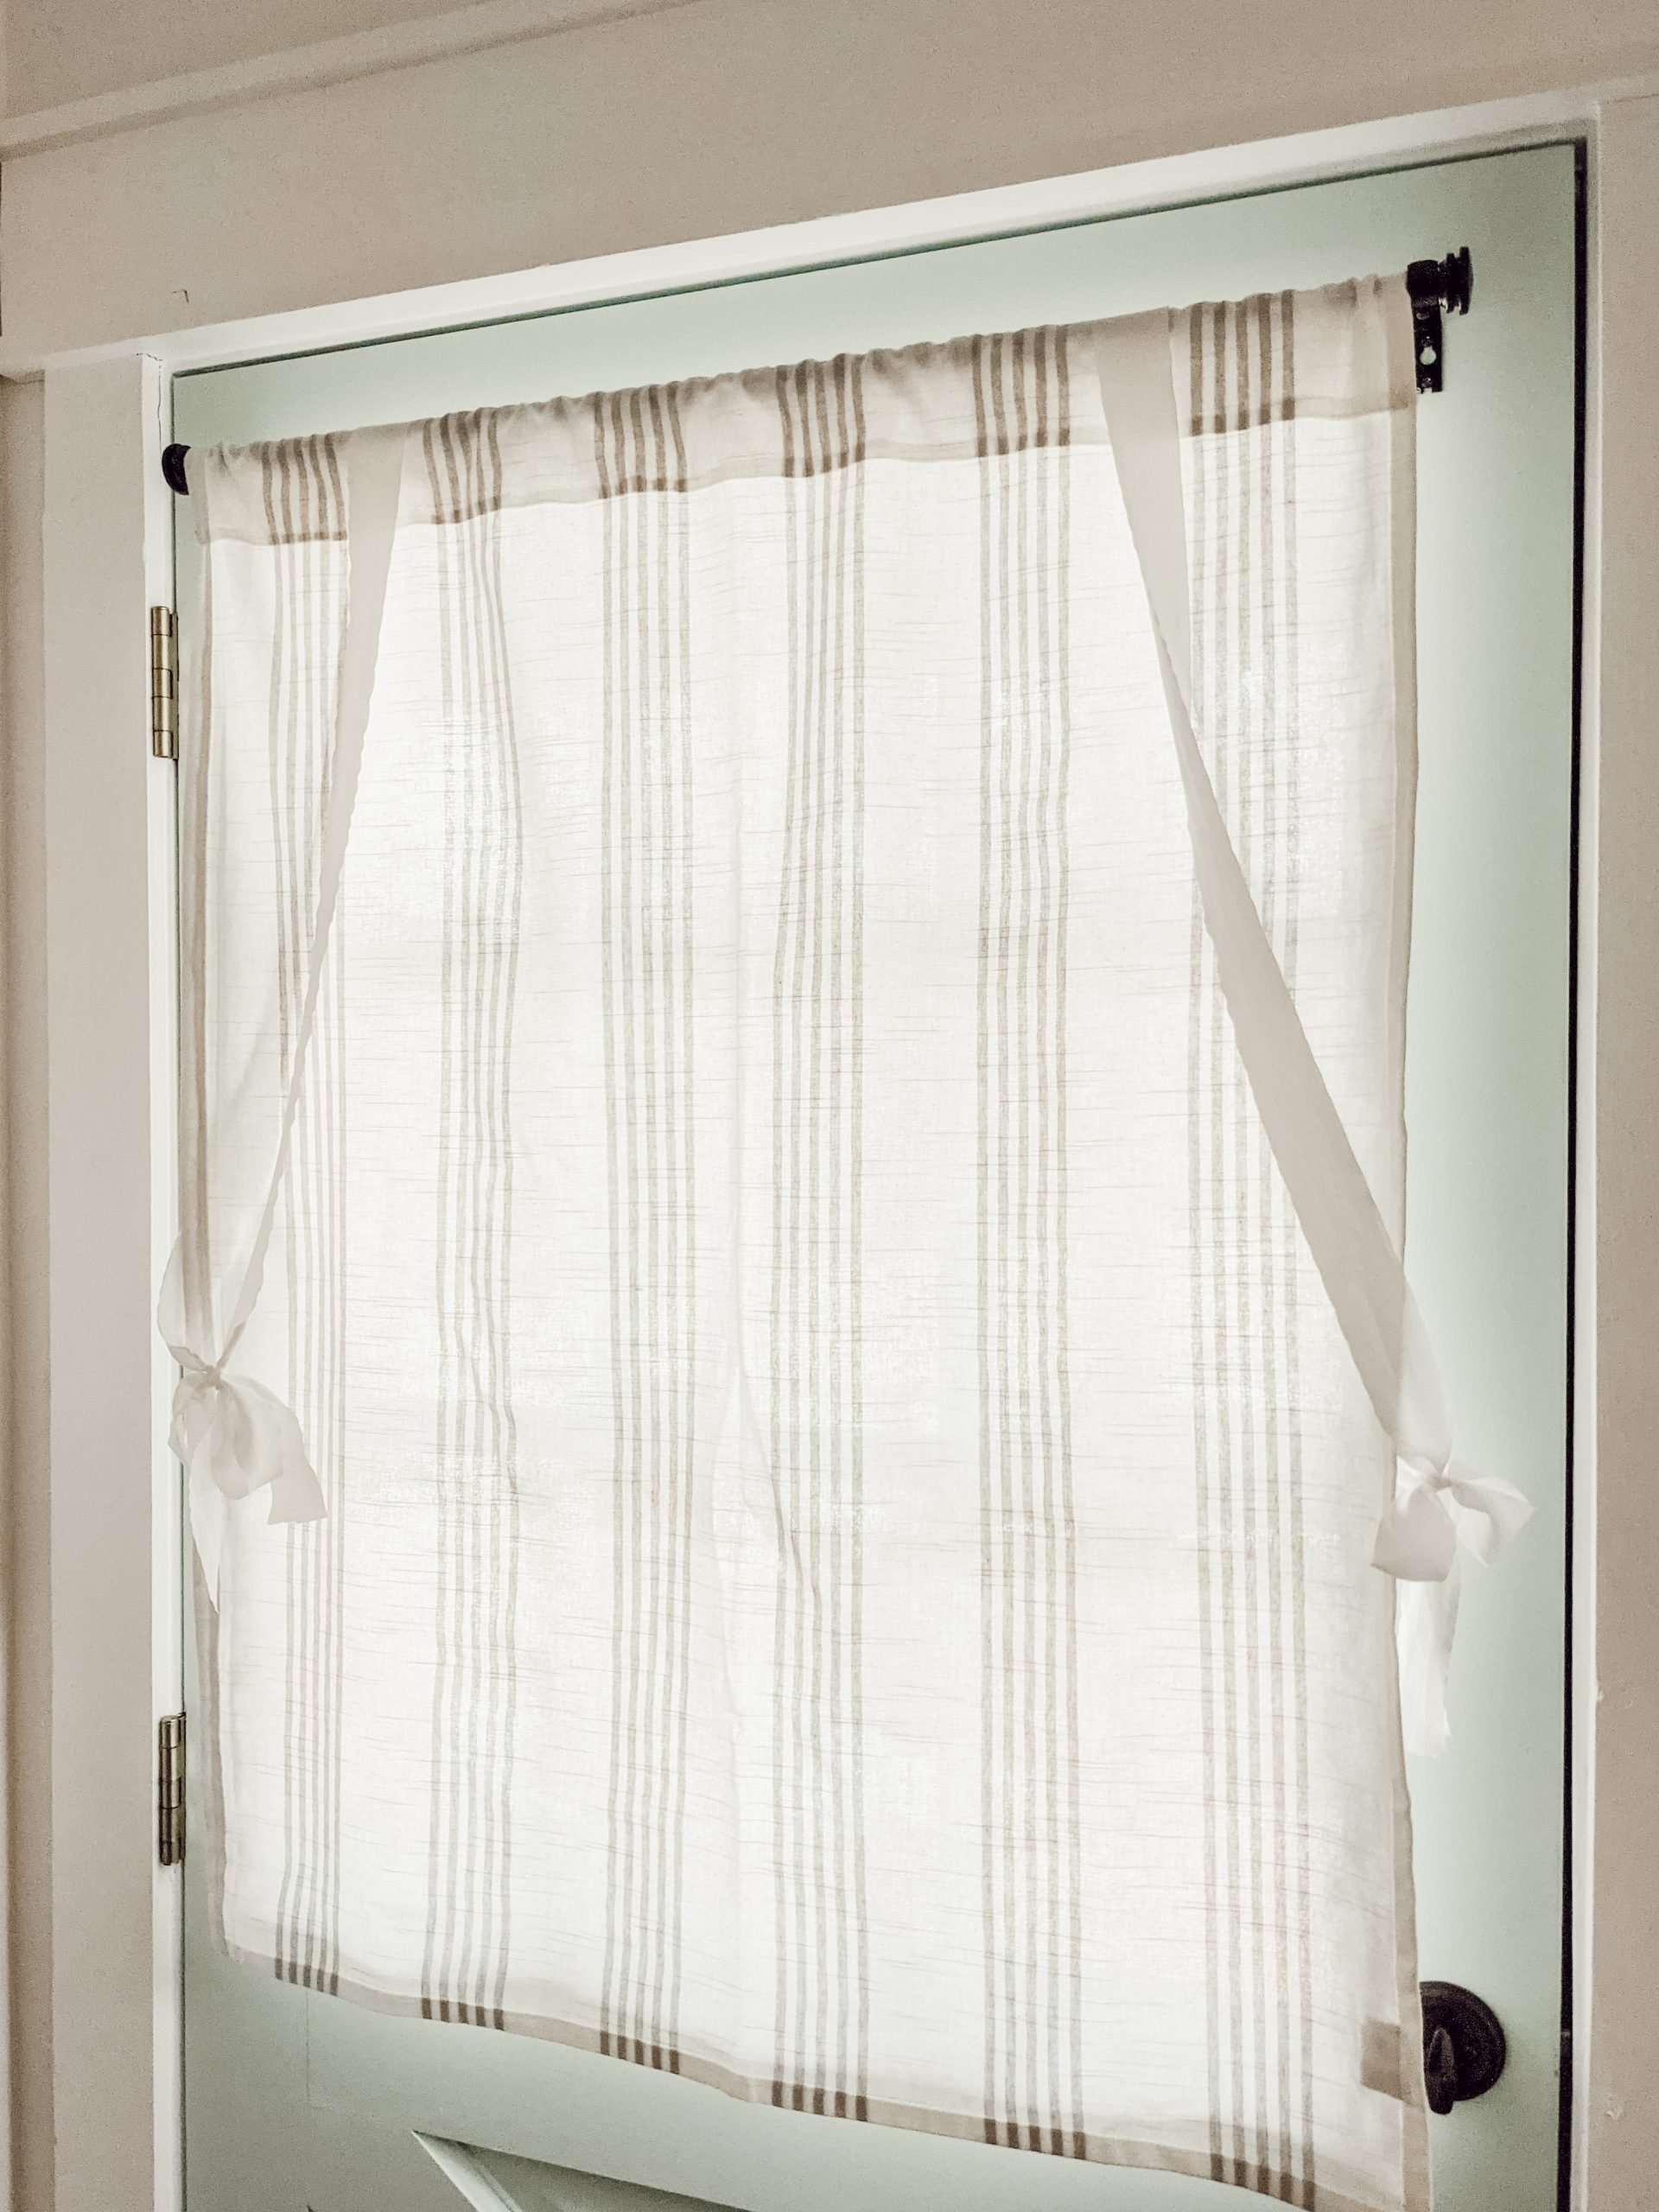 Diy Tie-Up Curtains - White And Woodgrain